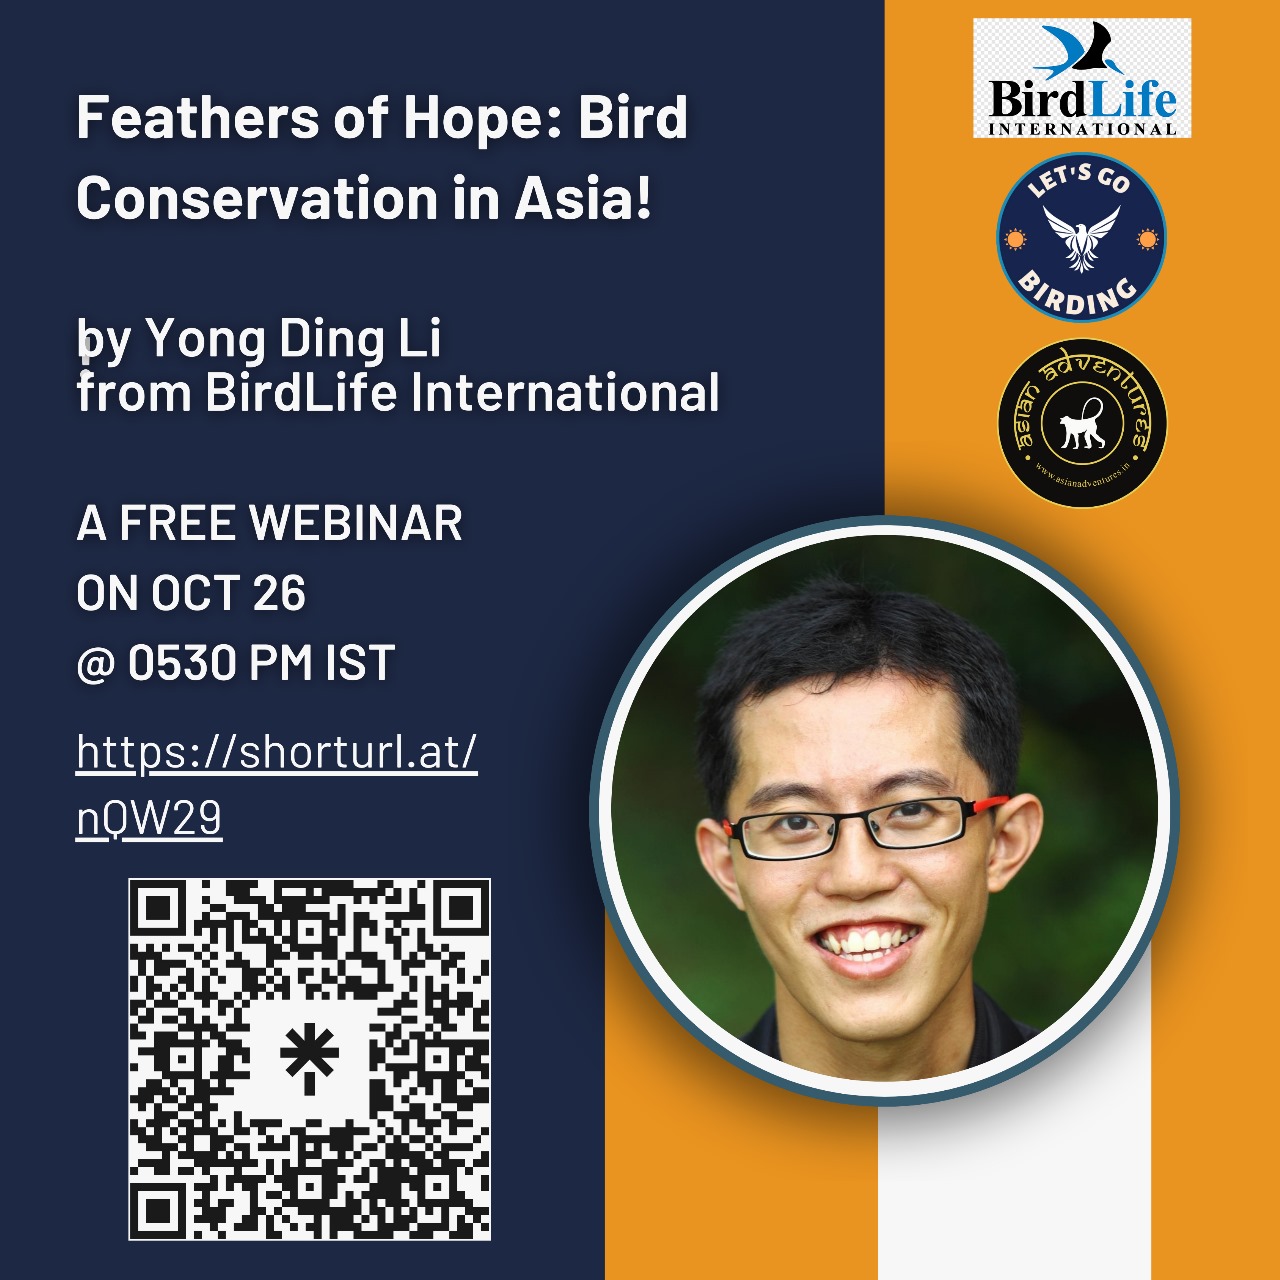 Feathers of Home: Bird Conservation in Asia!